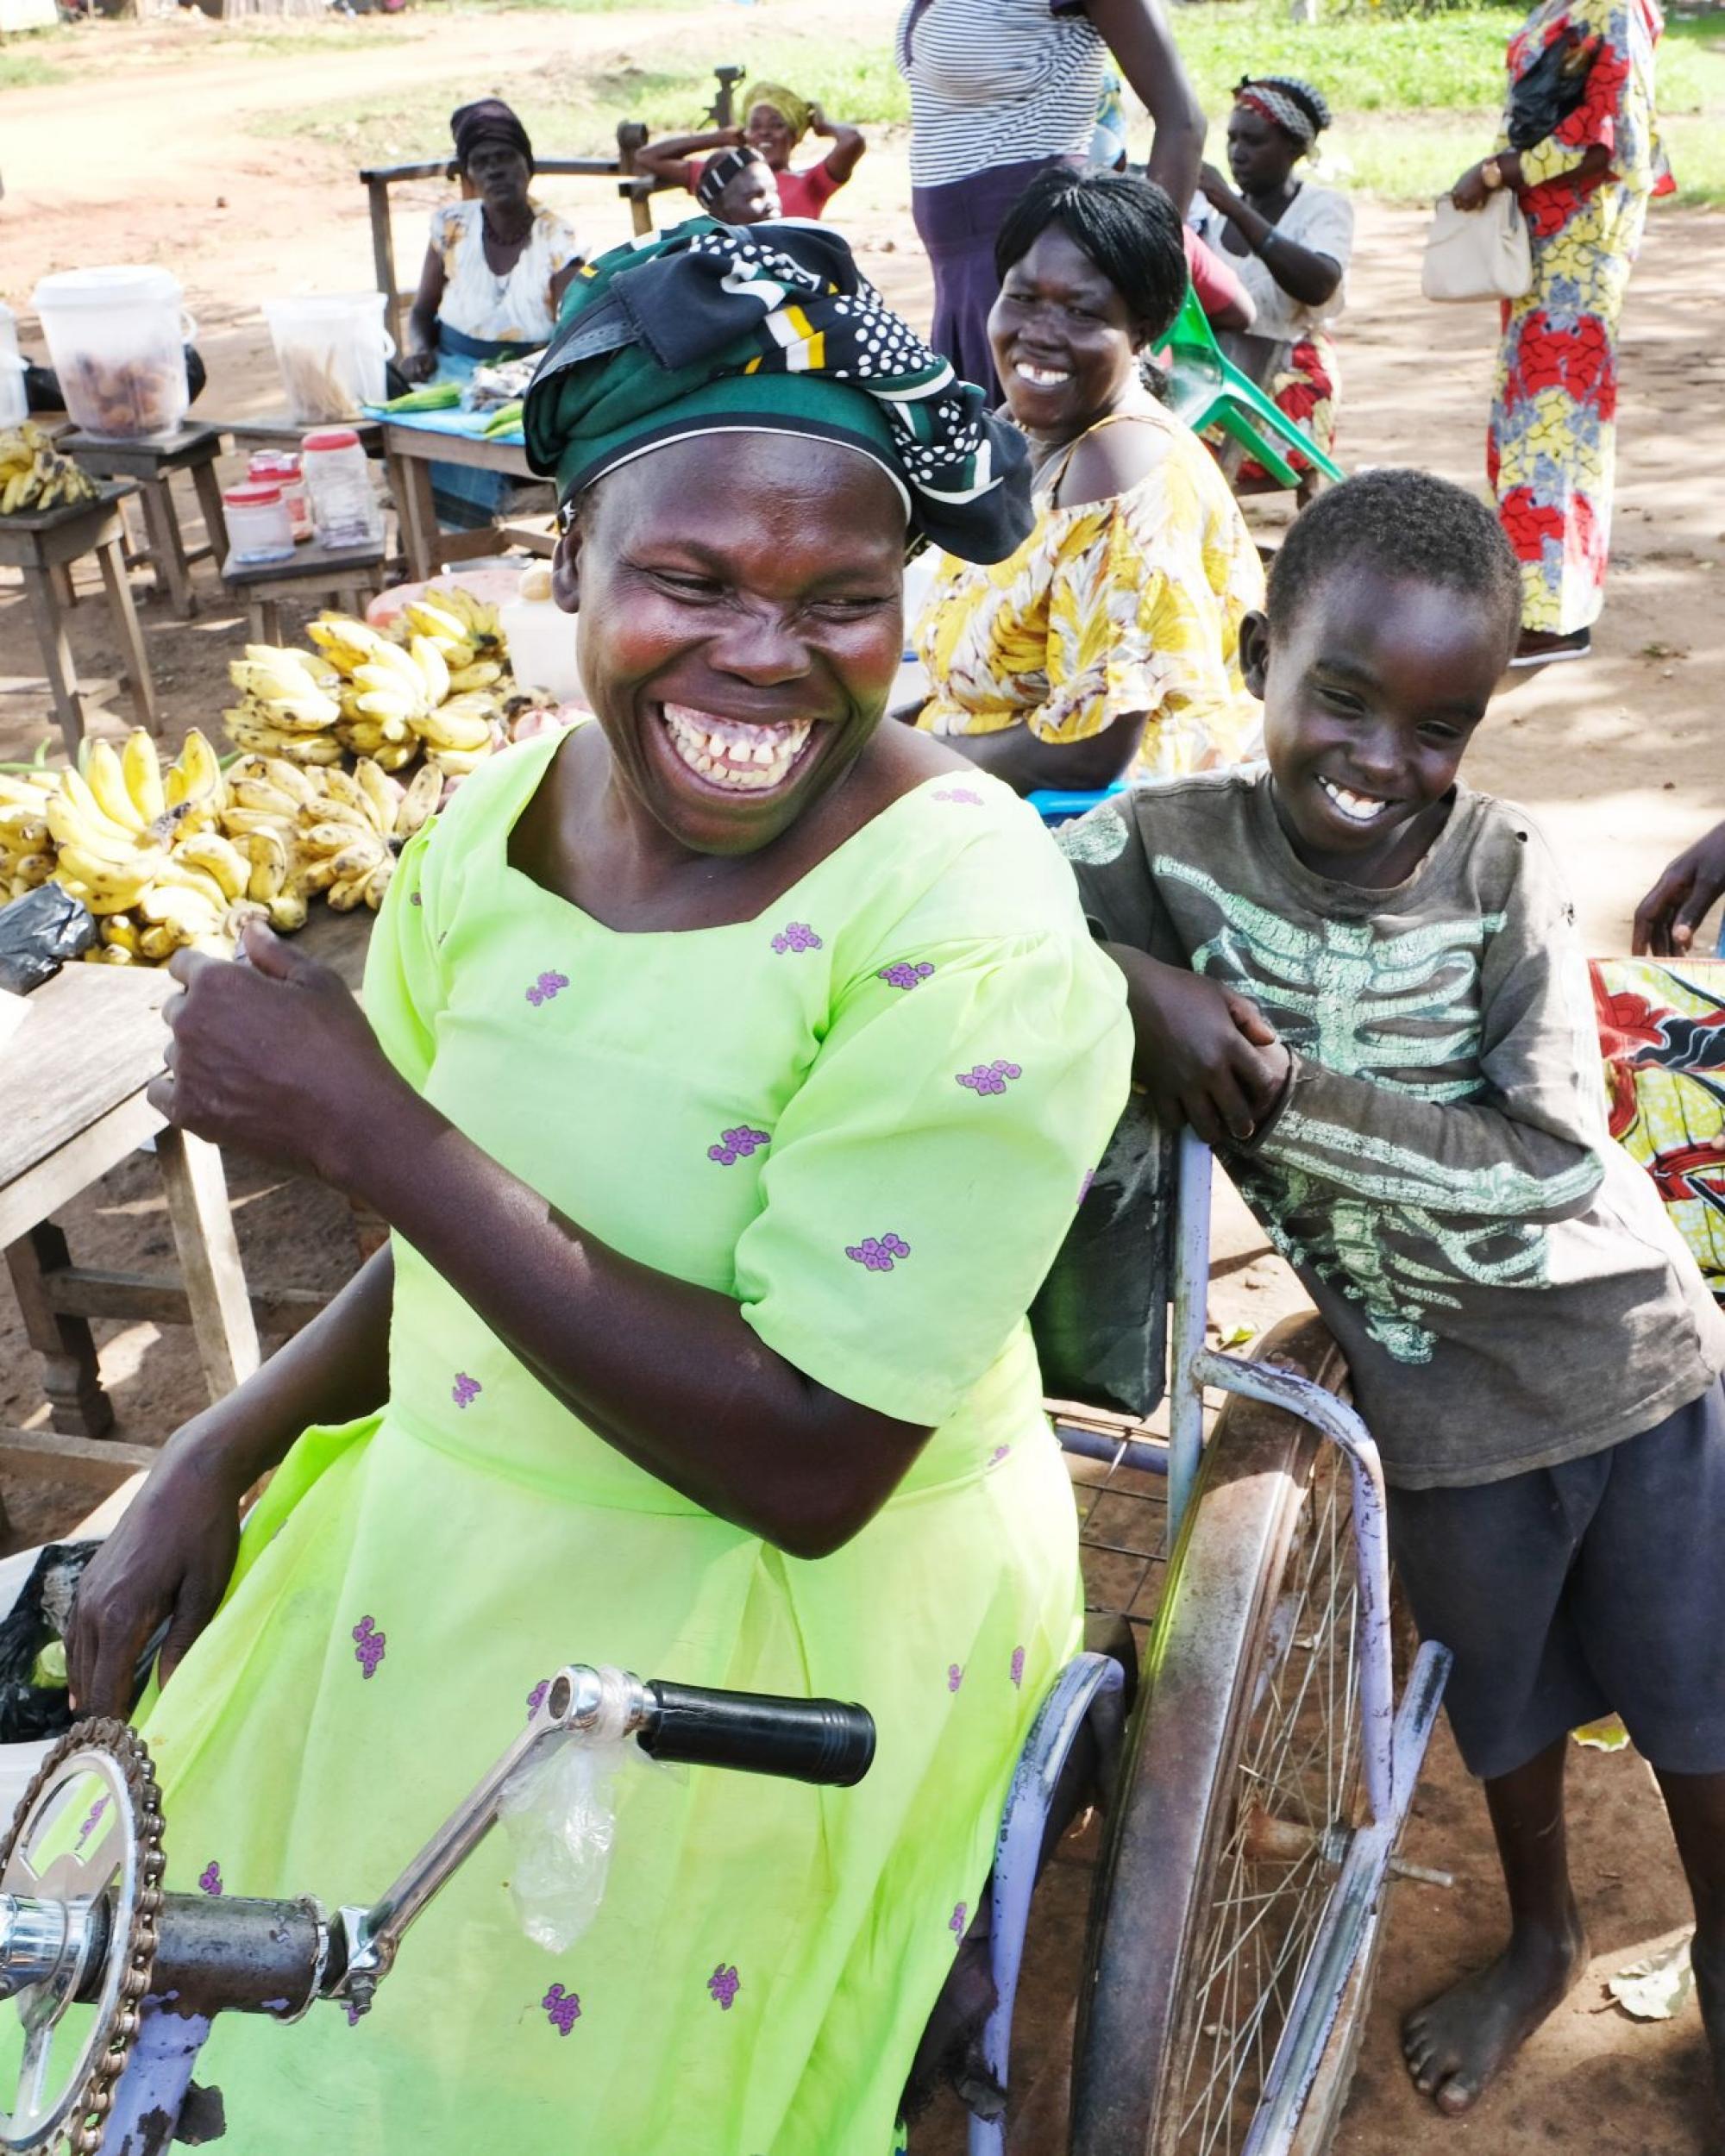 Uganda: Photo of an older woman sitting on a wooden chair. She holds a crutch in her hand. She has visual and physical impairments. A young man and a young woman from Handicap International sit next to her. Another young man looks in the direction of the older woman. He is not an employee of the organization.